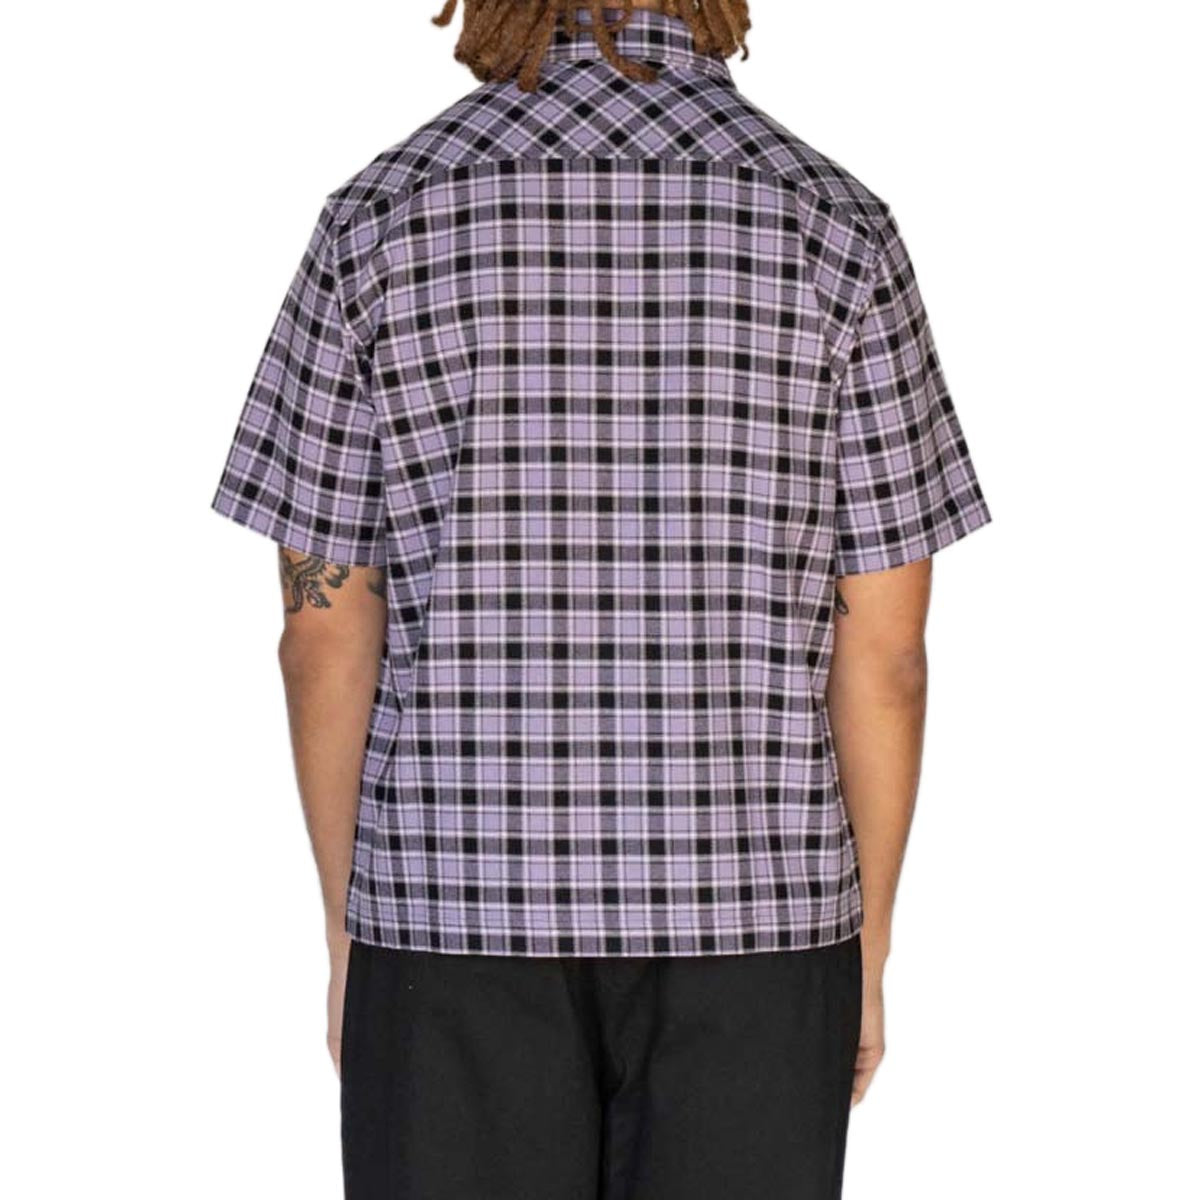 Welcome Cell Woven Plaid Zip Shirt - Lavender Grey image 2